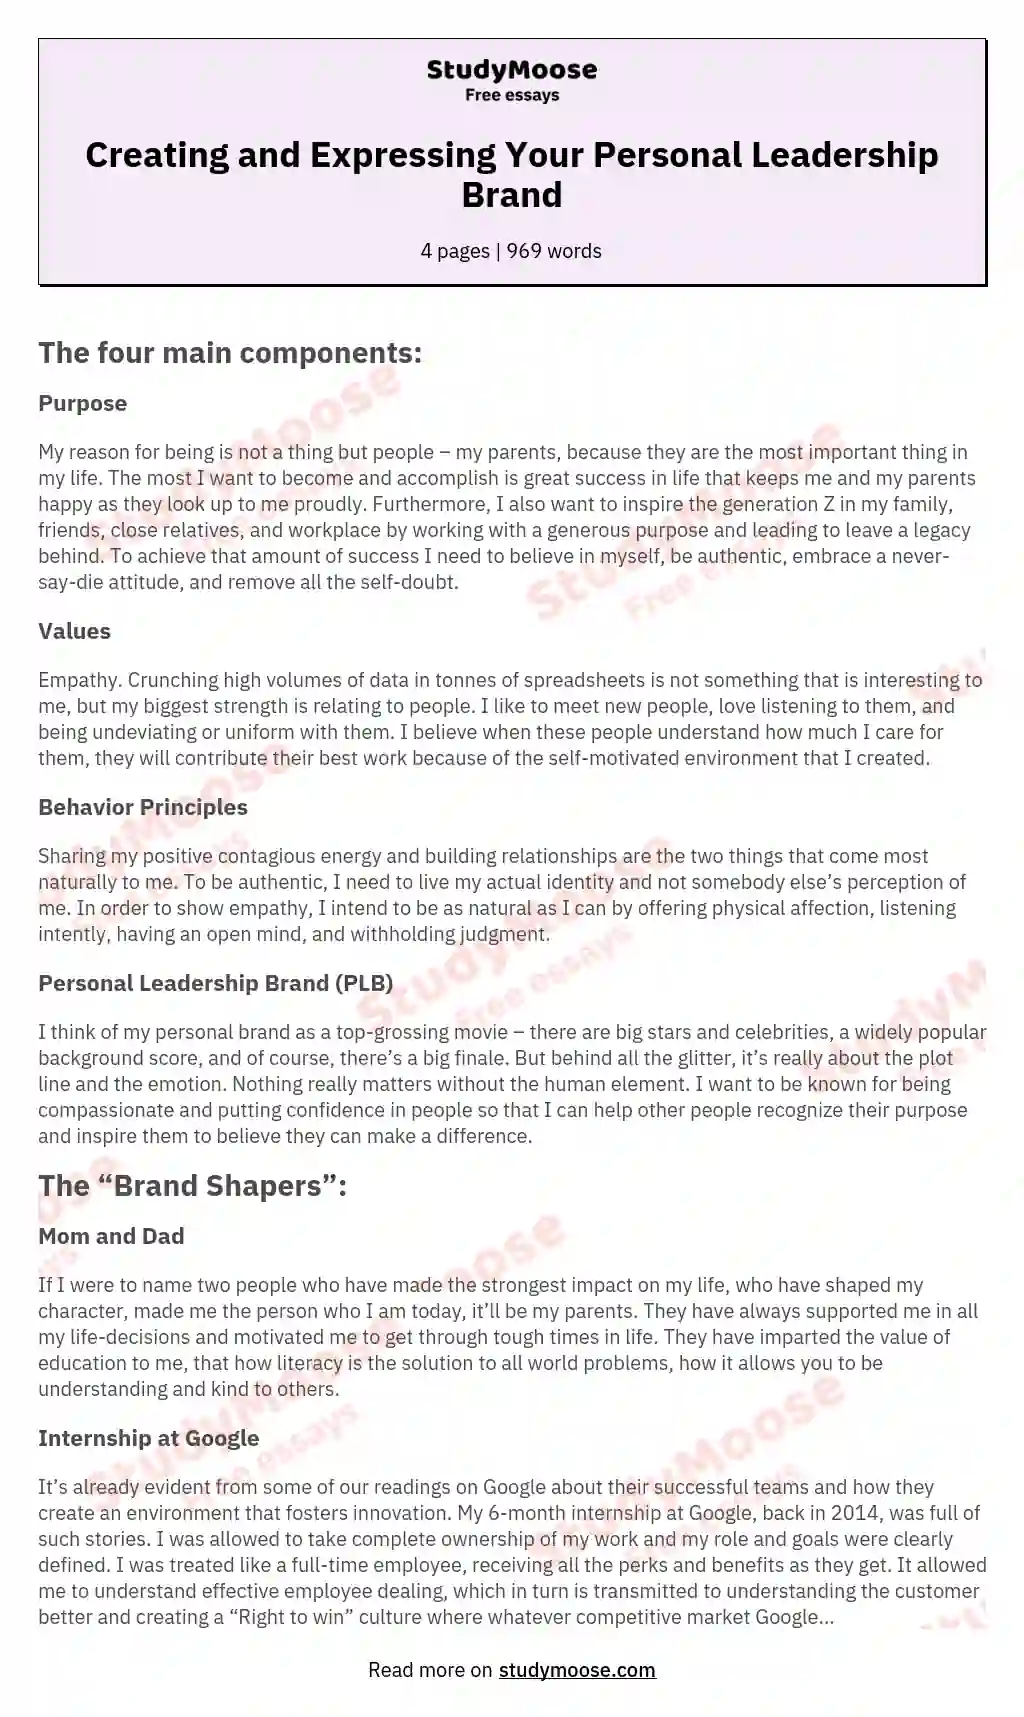 Creating and Expressing Your Personal Leadership Brand essay